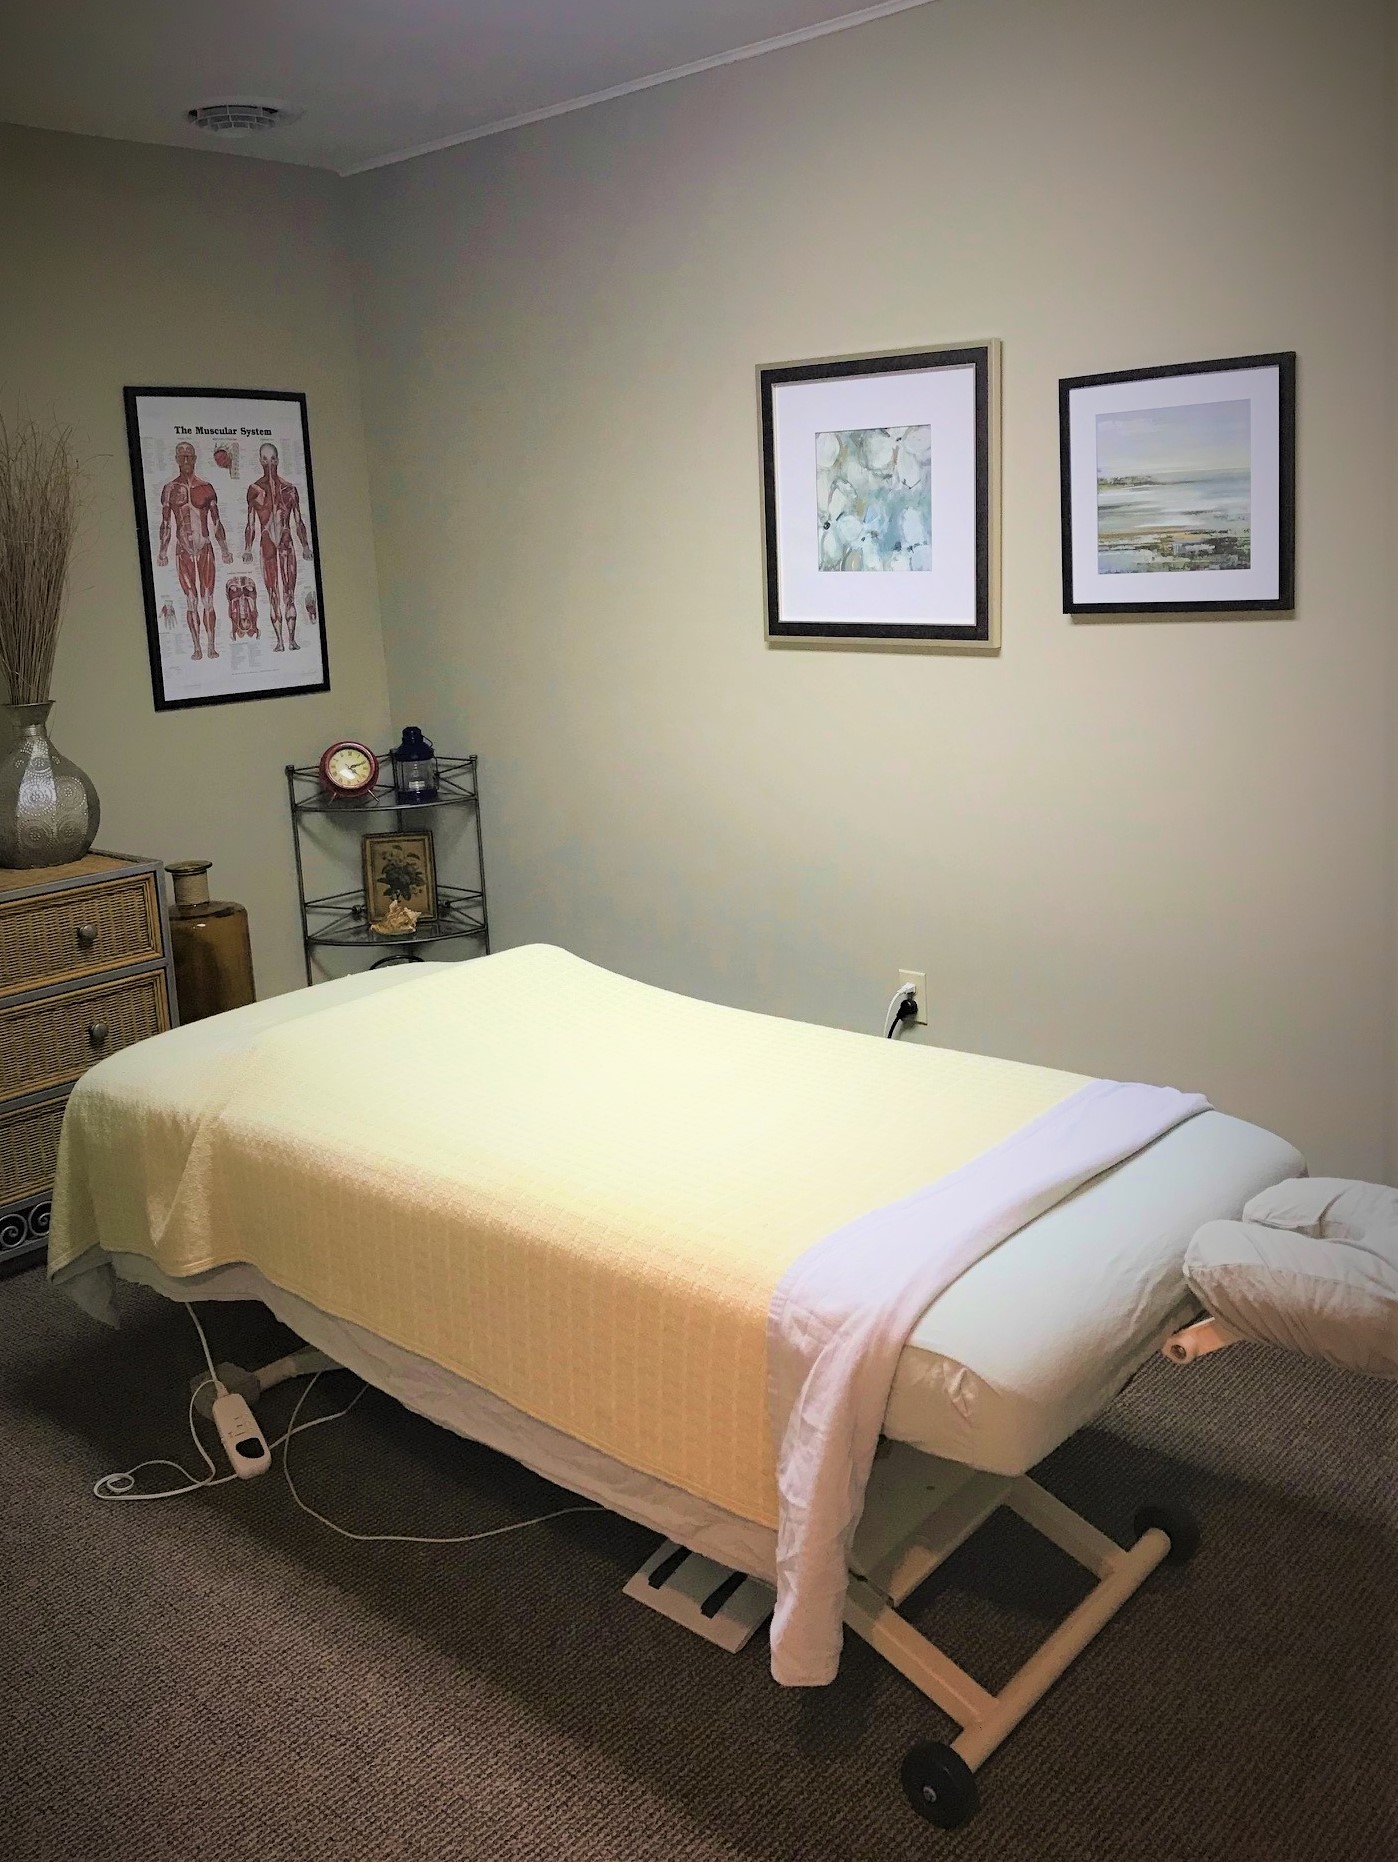 Therapeutic Massage Works